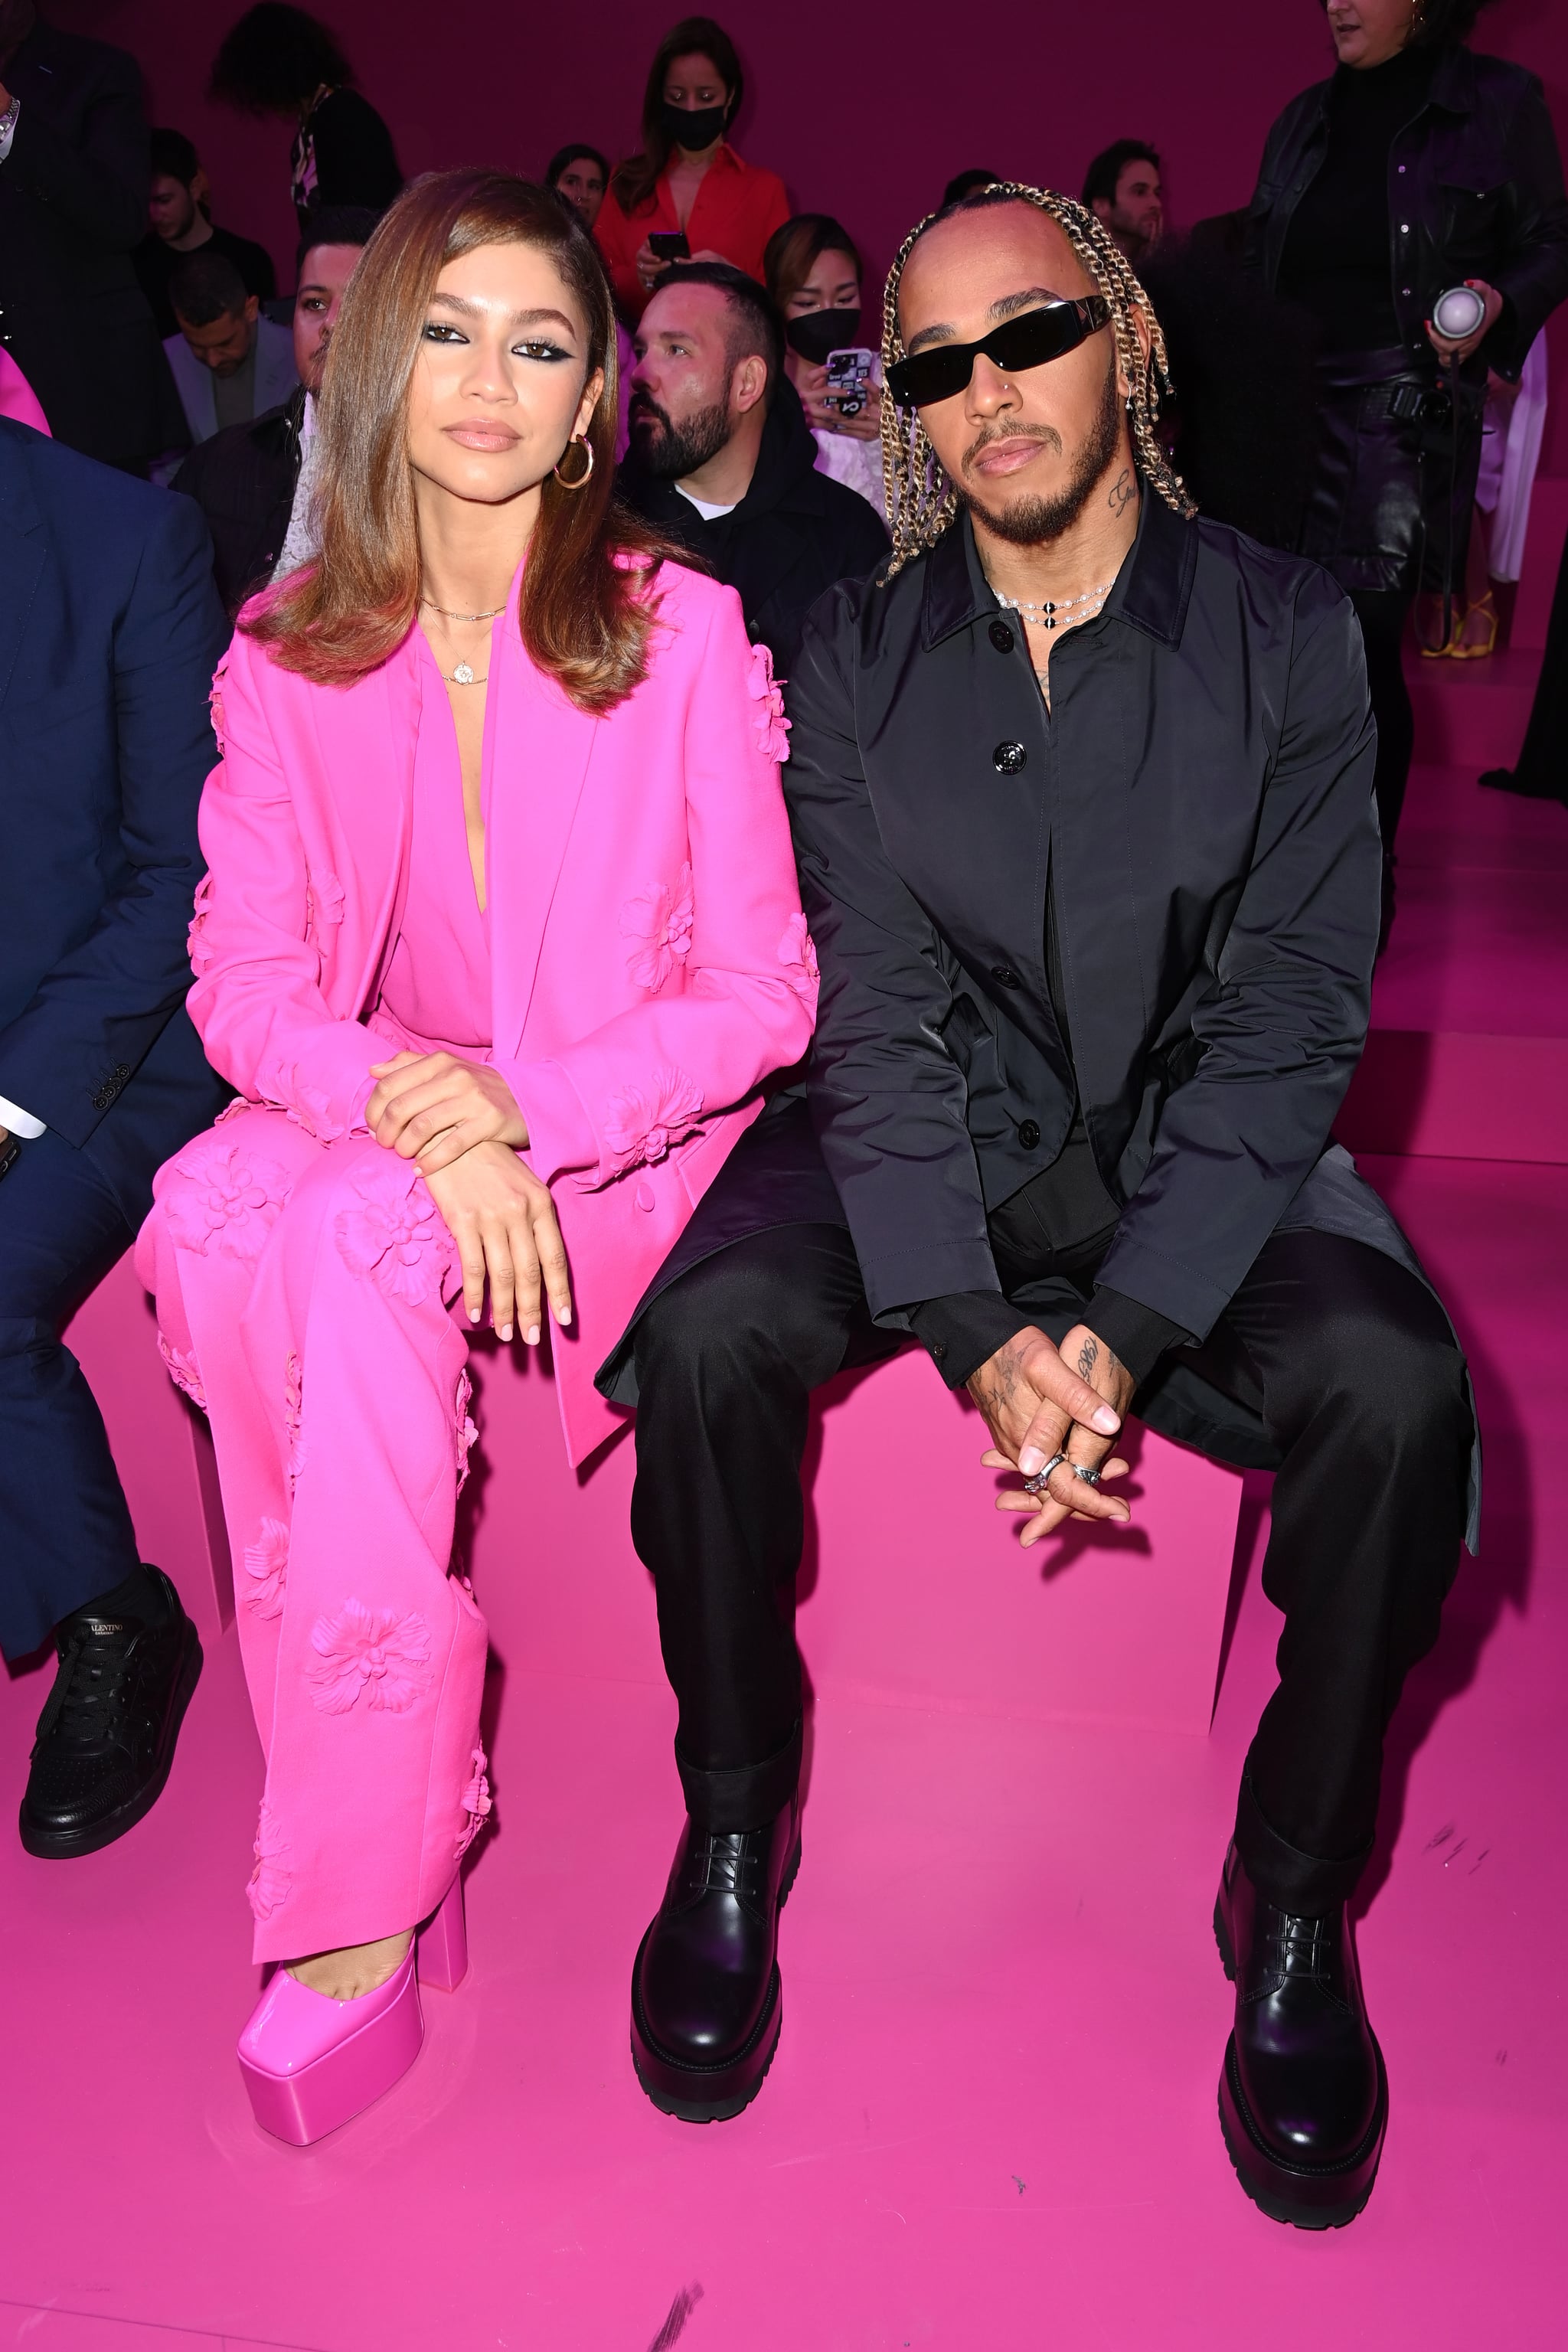 PARIS, FRANCE - MARCH 6: (EDIT USE ONLY - For non-Editors' use, please seek Fashion House approval) Zendaya and Lewis Hamilton attend the Valentino Womenswear show Fall/Winter 2022/2023 as part of Paris Fashion Week on March 6, 2022 in Paris, France.  (Photo by Pascal Le Segretain / Getty Images)